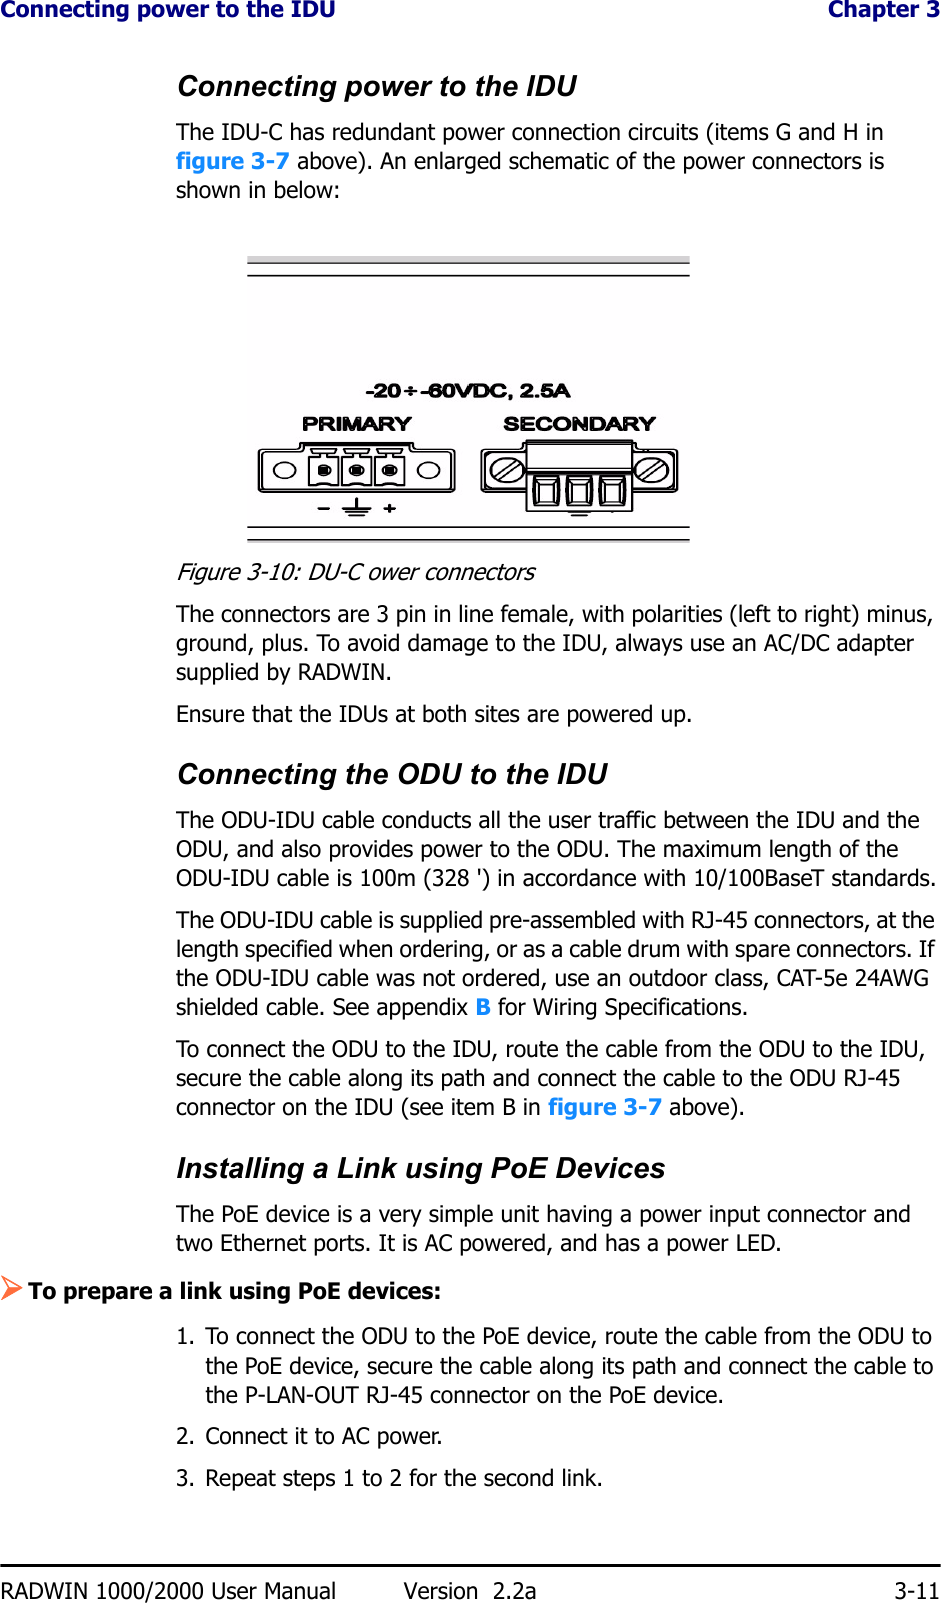 Connecting power to the IDU  Chapter 3RADWIN 1000/2000 User Manual Version  2.2a 3-11Connecting power to the IDUThe IDU-C has redundant power connection circuits (items G and H in figure 3-7 above). An enlarged schematic of the power connectors is shown in below:Figure 3-10: DU-C ower connectorsThe connectors are 3 pin in line female, with polarities (left to right) minus, ground, plus. To avoid damage to the IDU, always use an AC/DC adapter supplied by RADWIN.Ensure that the IDUs at both sites are powered up.Connecting the ODU to the IDUThe ODU-IDU cable conducts all the user traffic between the IDU and the ODU, and also provides power to the ODU. The maximum length of the ODU-IDU cable is 100m (328 &apos;) in accordance with 10/100BaseT standards.The ODU-IDU cable is supplied pre-assembled with RJ-45 connectors, at the length specified when ordering, or as a cable drum with spare connectors. If the ODU-IDU cable was not ordered, use an outdoor class, CAT-5e 24AWG shielded cable. See appendix B for Wiring Specifications.To connect the ODU to the IDU, route the cable from the ODU to the IDU, secure the cable along its path and connect the cable to the ODU RJ-45 connector on the IDU (see item B in figure 3-7 above).Installing a Link using PoE DevicesThe PoE device is a very simple unit having a power input connector and two Ethernet ports. It is AC powered, and has a power LED.¾To prepare a link using PoE devices:1. To connect the ODU to the PoE device, route the cable from the ODU to the PoE device, secure the cable along its path and connect the cable to the P-LAN-OUT RJ-45 connector on the PoE device.2. Connect it to AC power.3. Repeat steps 1 to 2 for the second link.